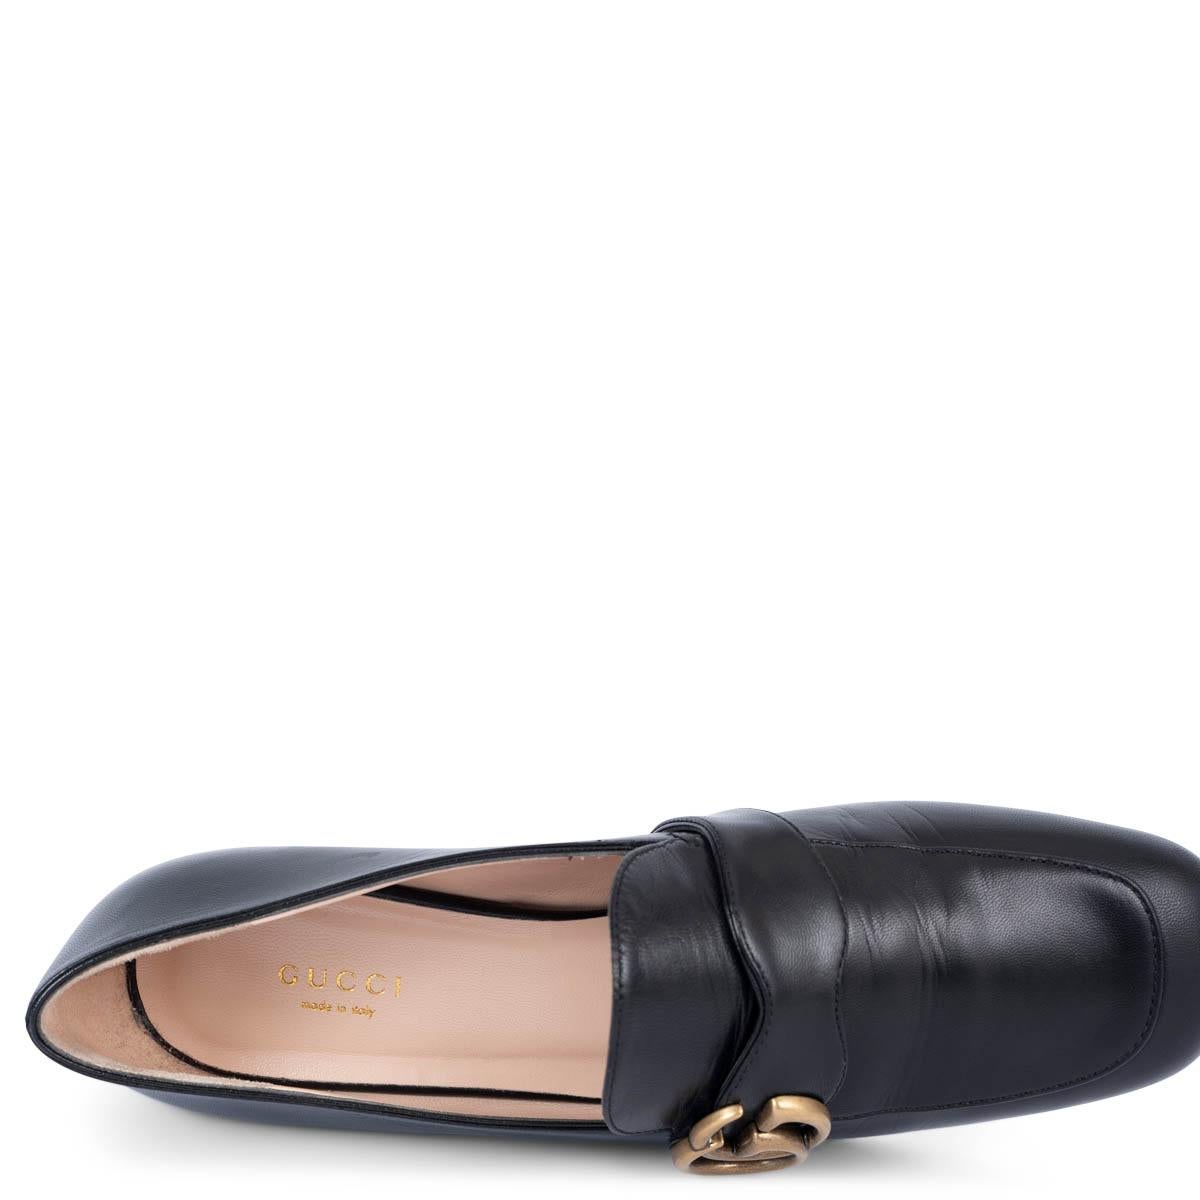 GUCCI black leather GG MARMONT Loafers Shoes 38 For Sale 3